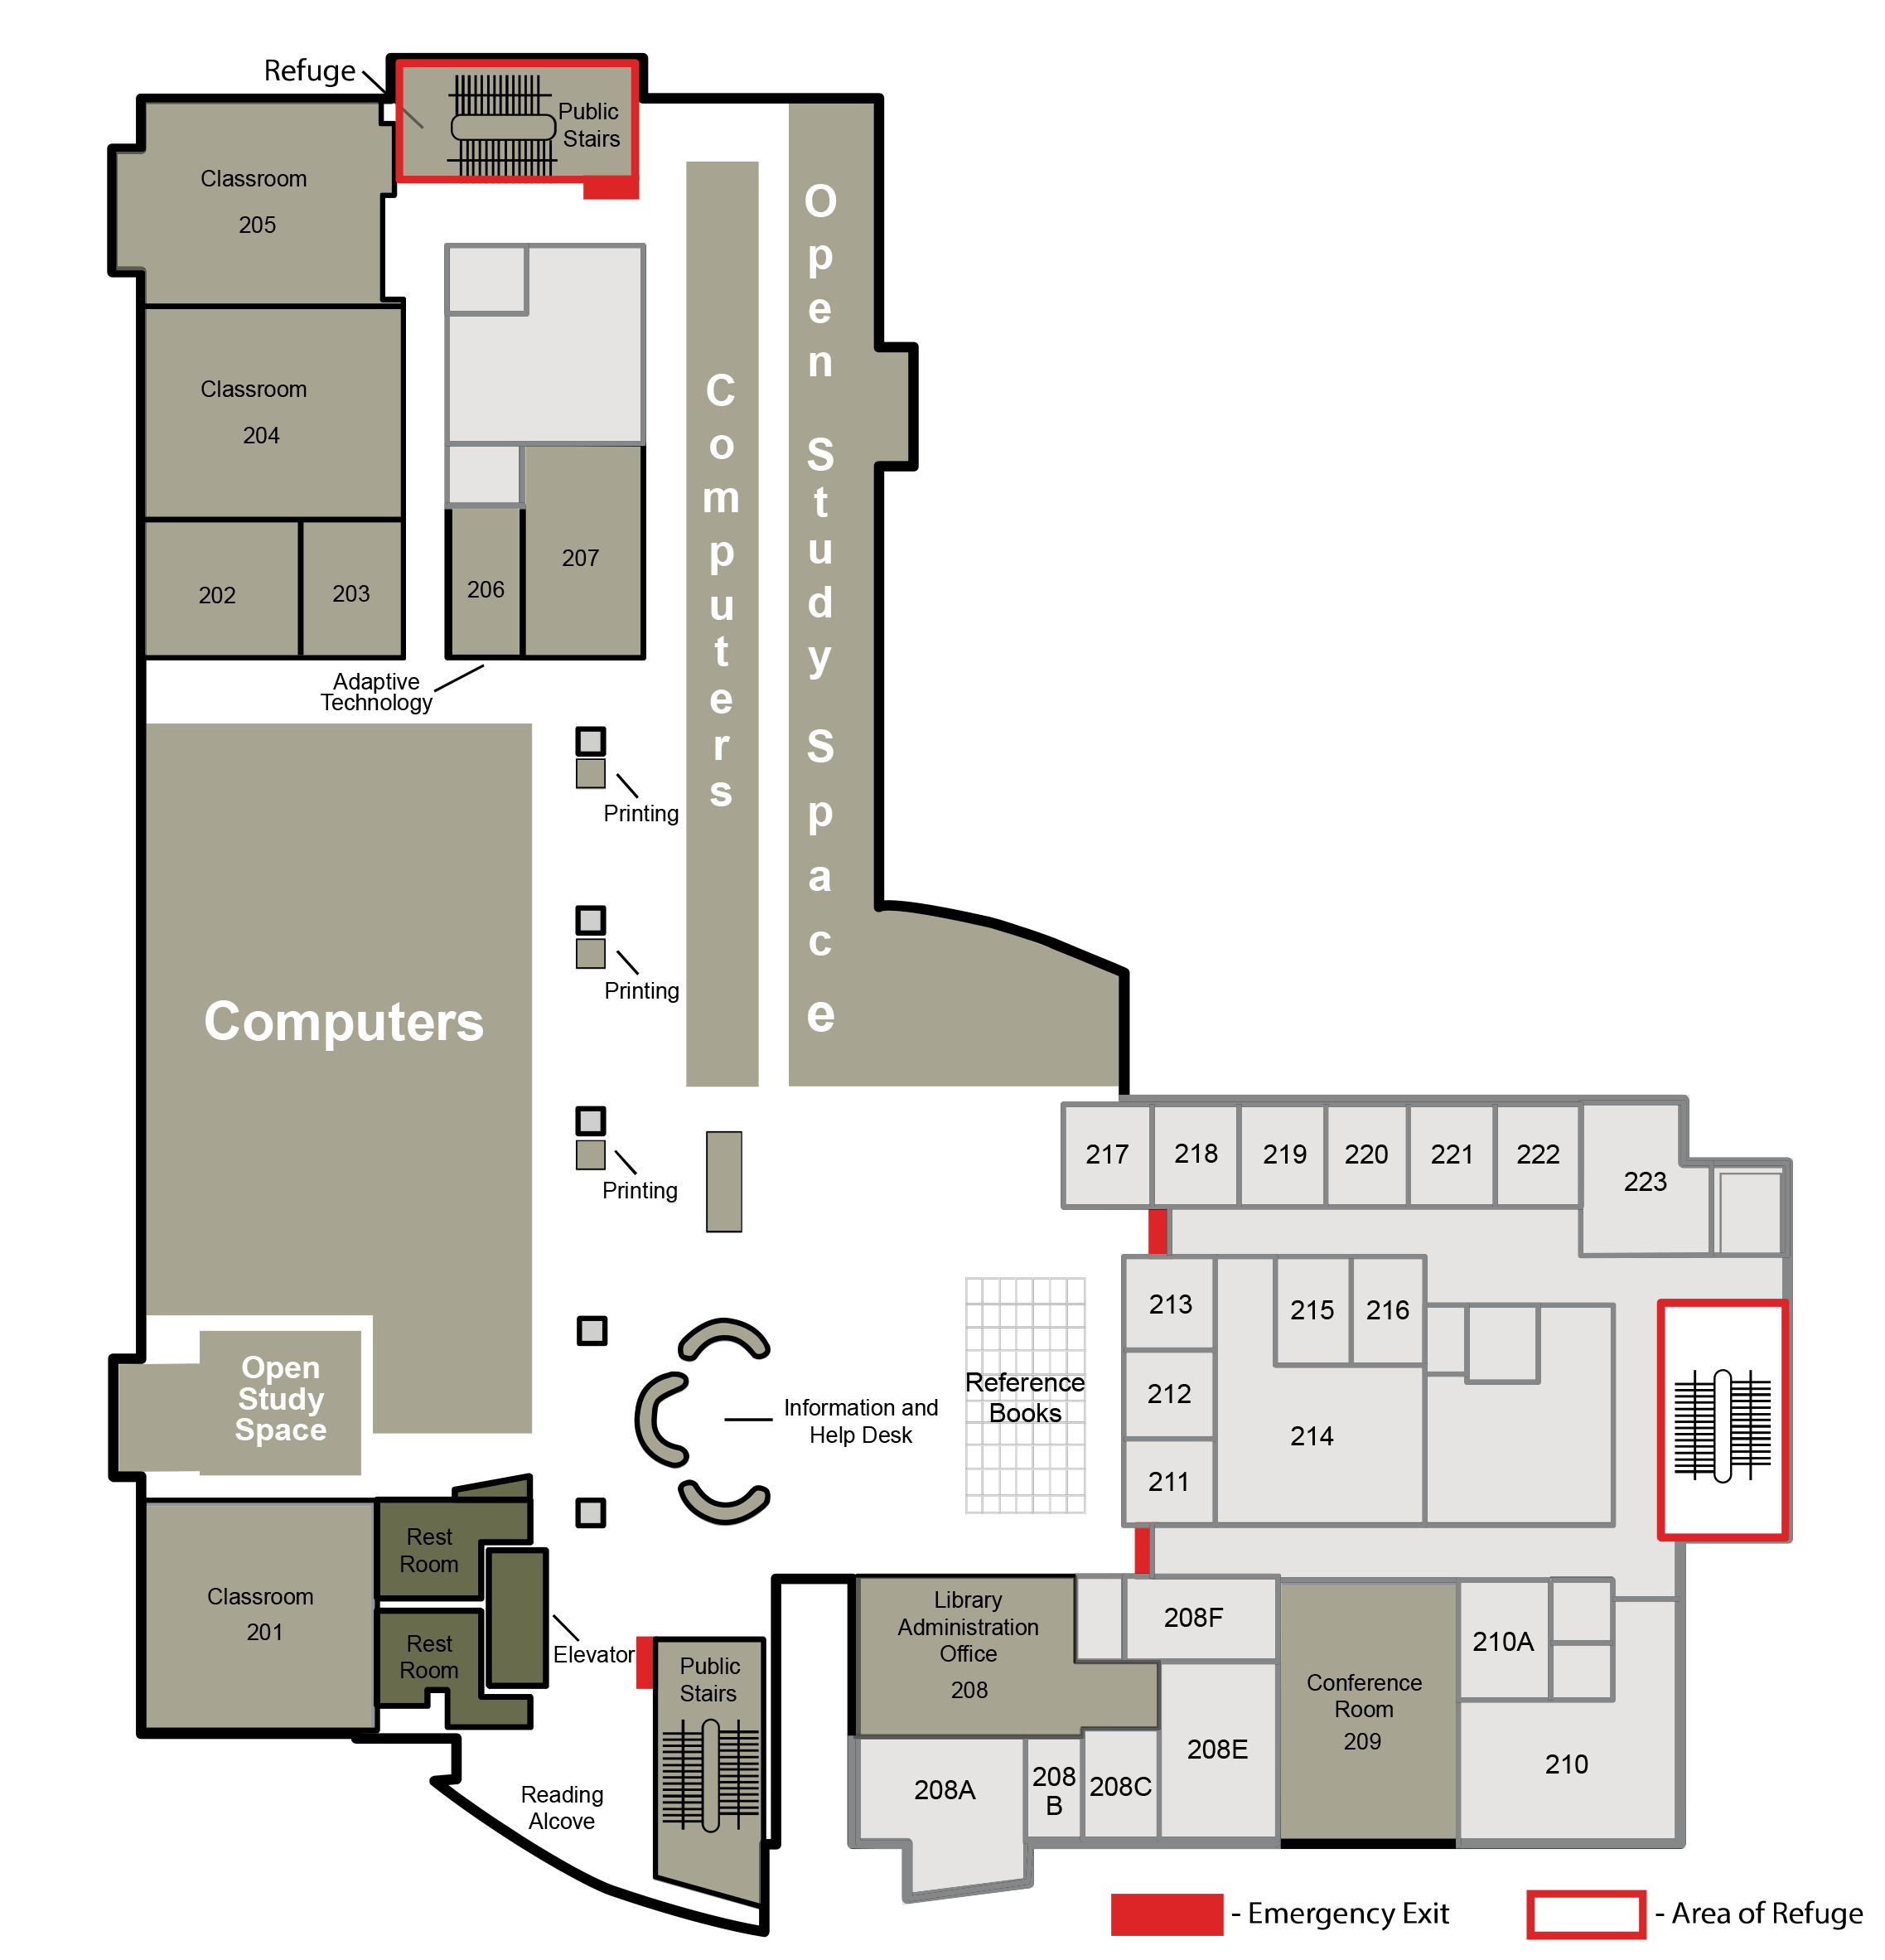 A map of the second floor of the library